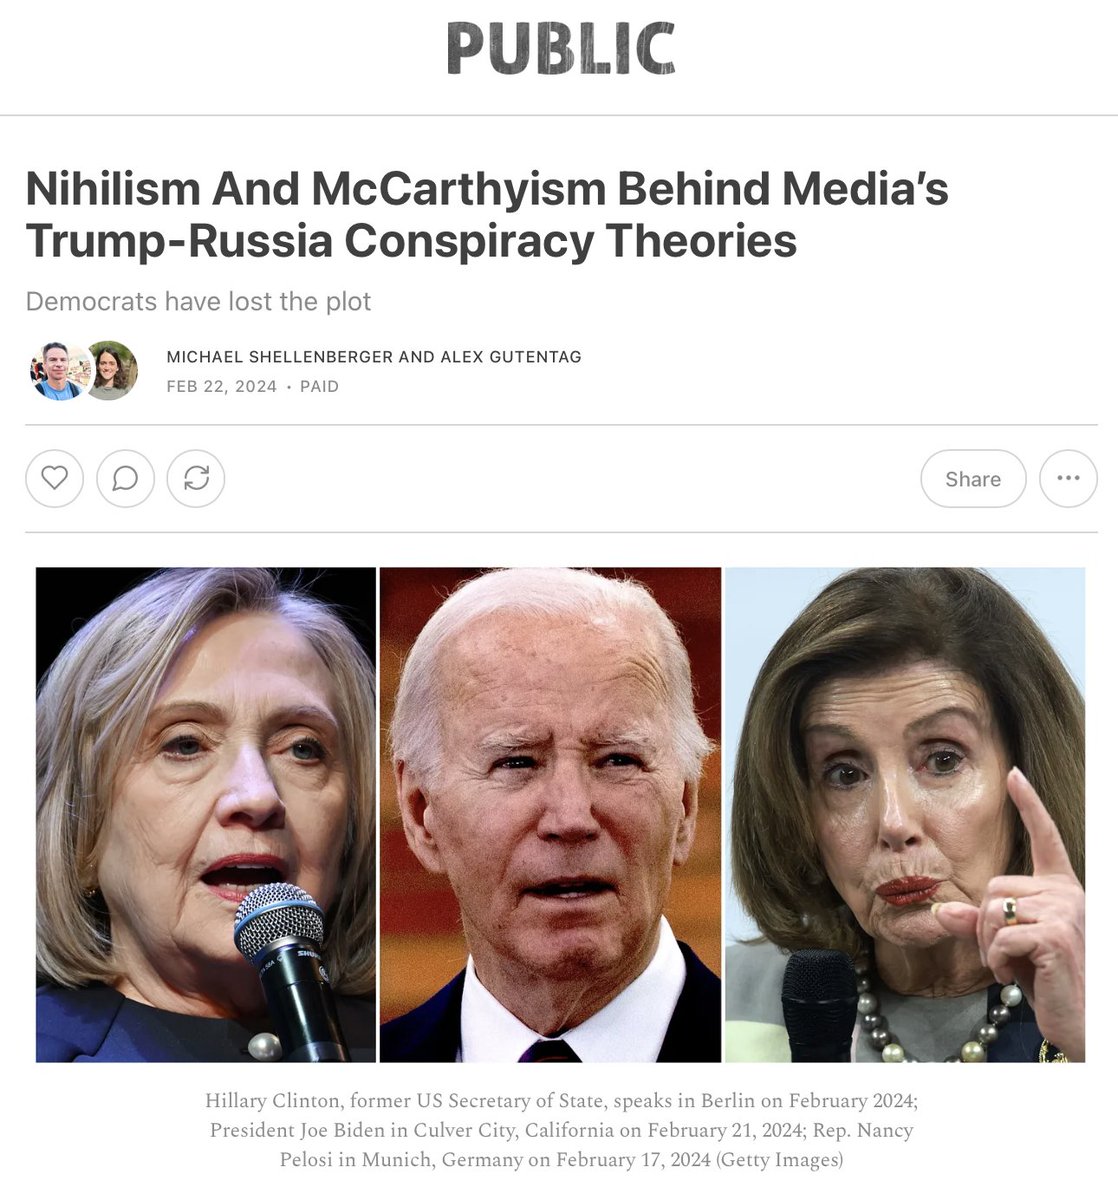 Russia is helping Republicans to steal the 2024 election, say the media. But there's no evidence of that. In 2016, Russia favored Clinton, not Trump, say credible sources. And now, nihilism and McCarthyism are reviving debunked Russia conspiracy theories.